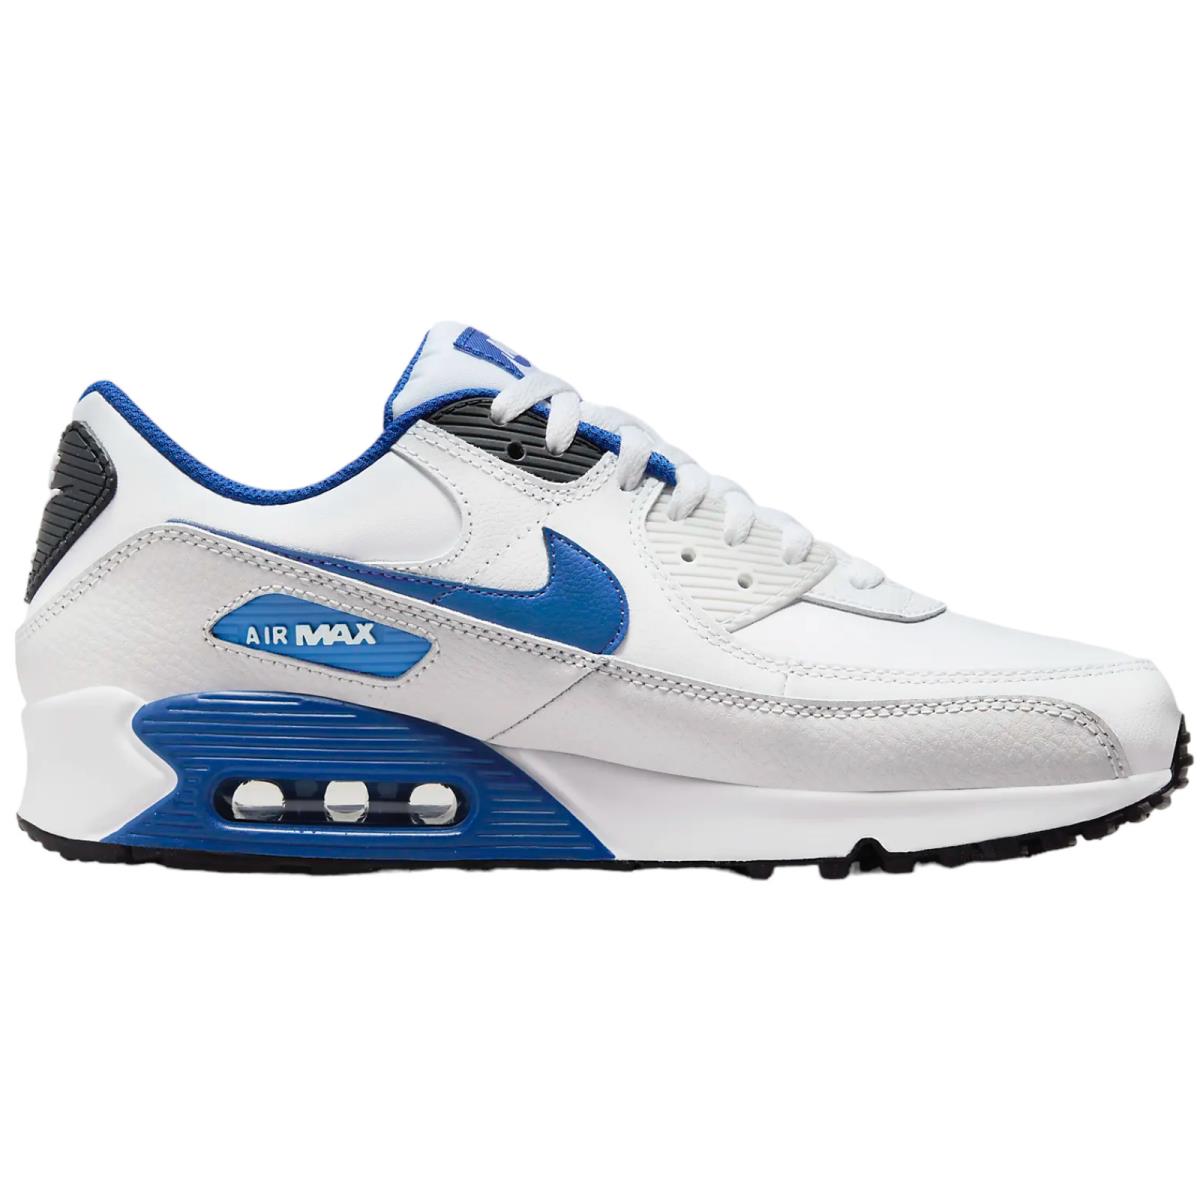 Nike Air Max 90 Men`s Casual Shoes All Colors US Sizes 7-14 Bestseller White/Photon Dust/Black/Game Royal